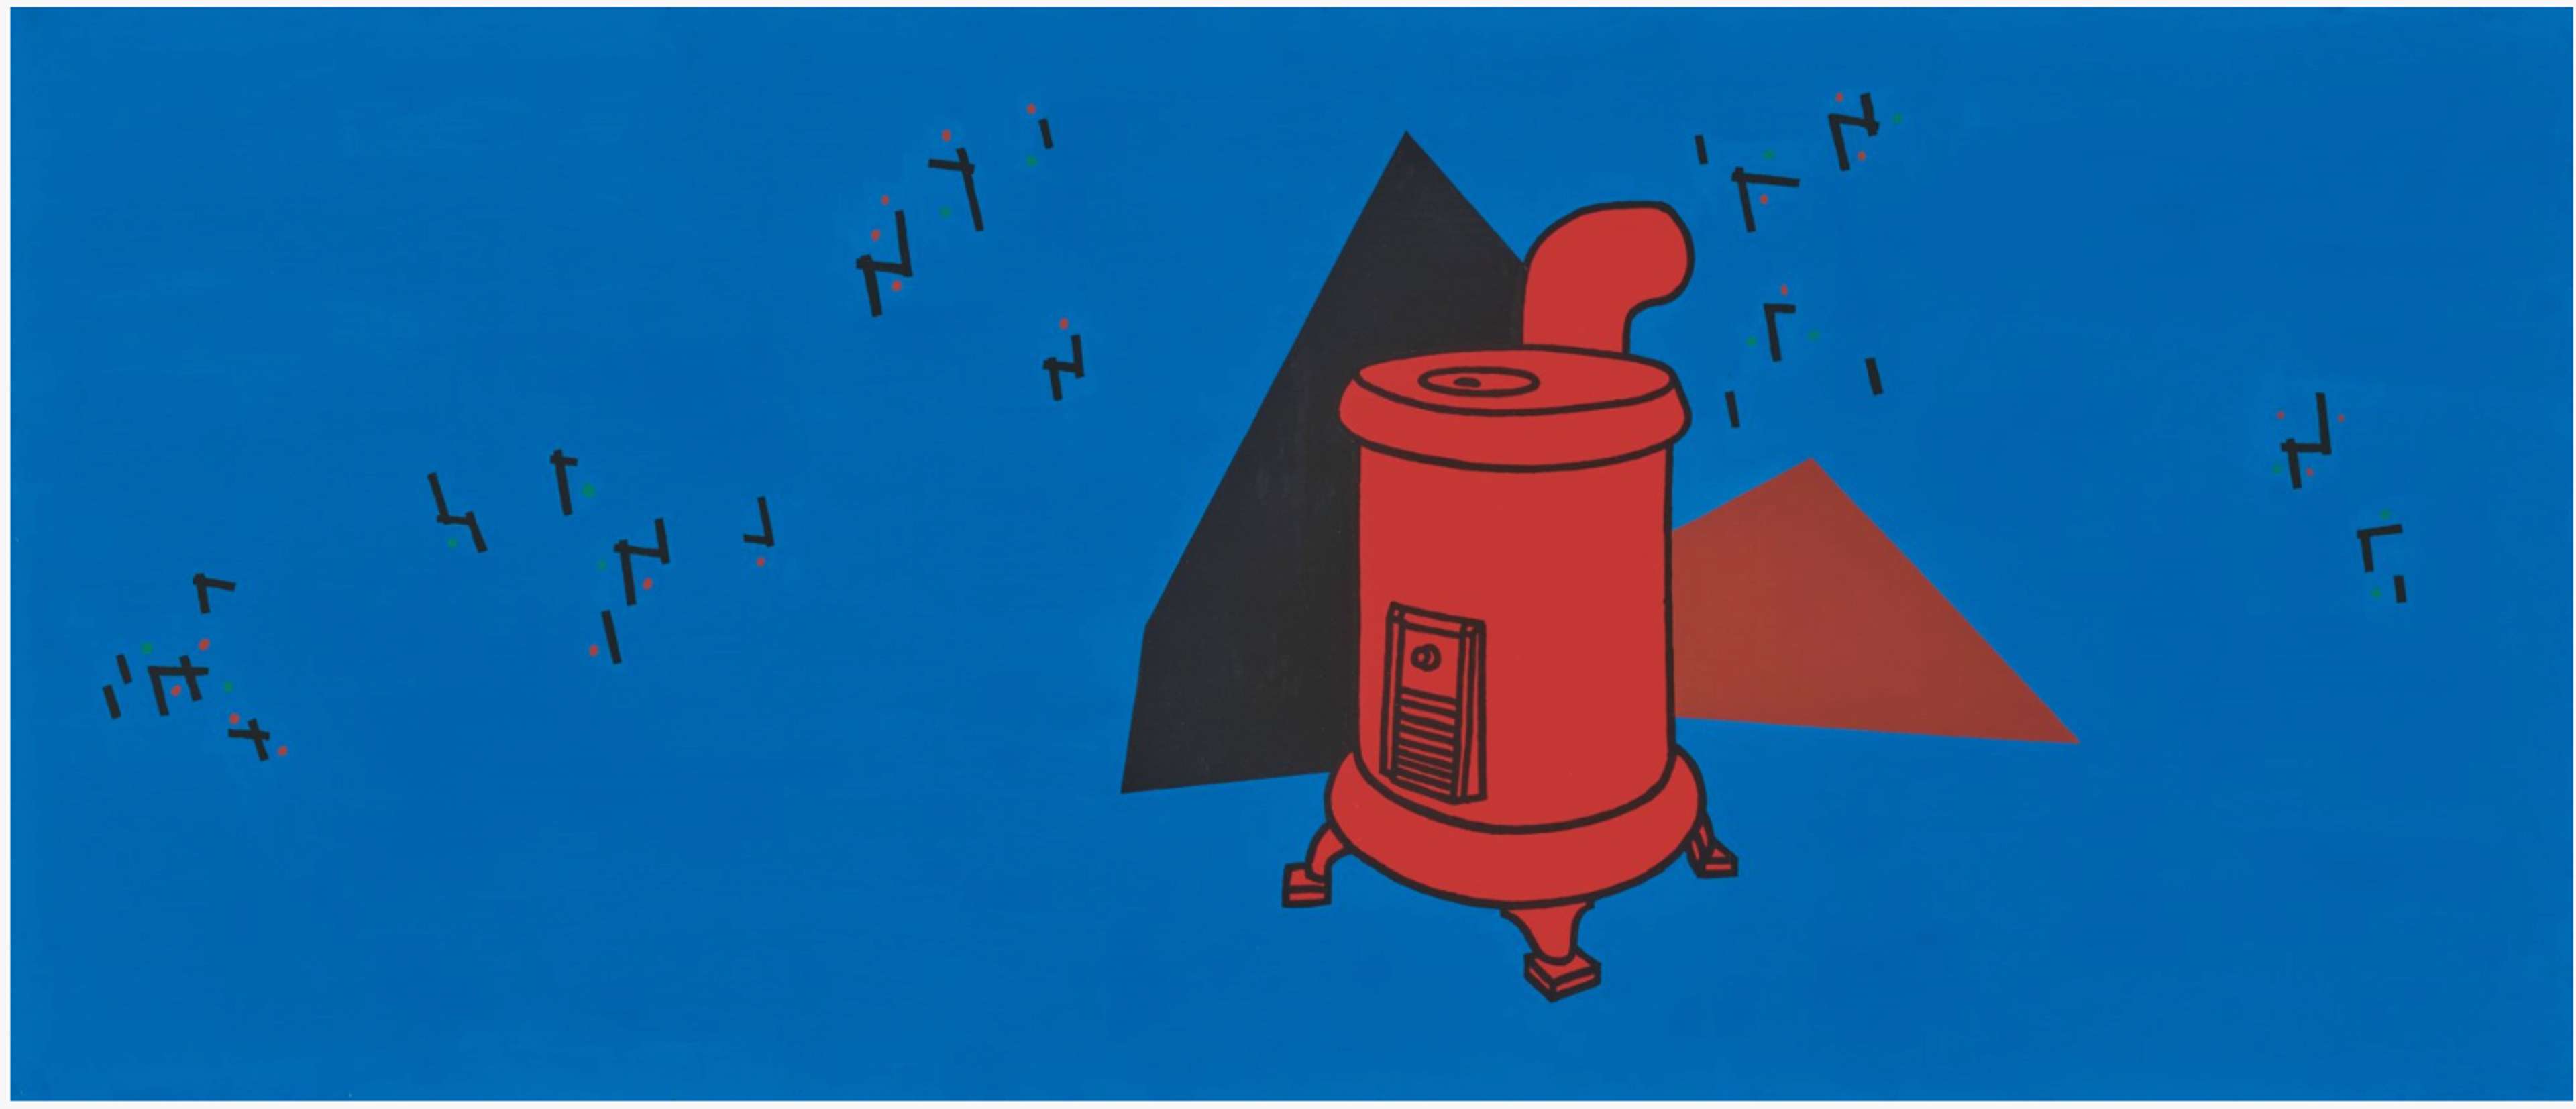  A single red furnace positioned against a vibrant blue background, with a black and red triangle behind it, creating an abstracted effect.